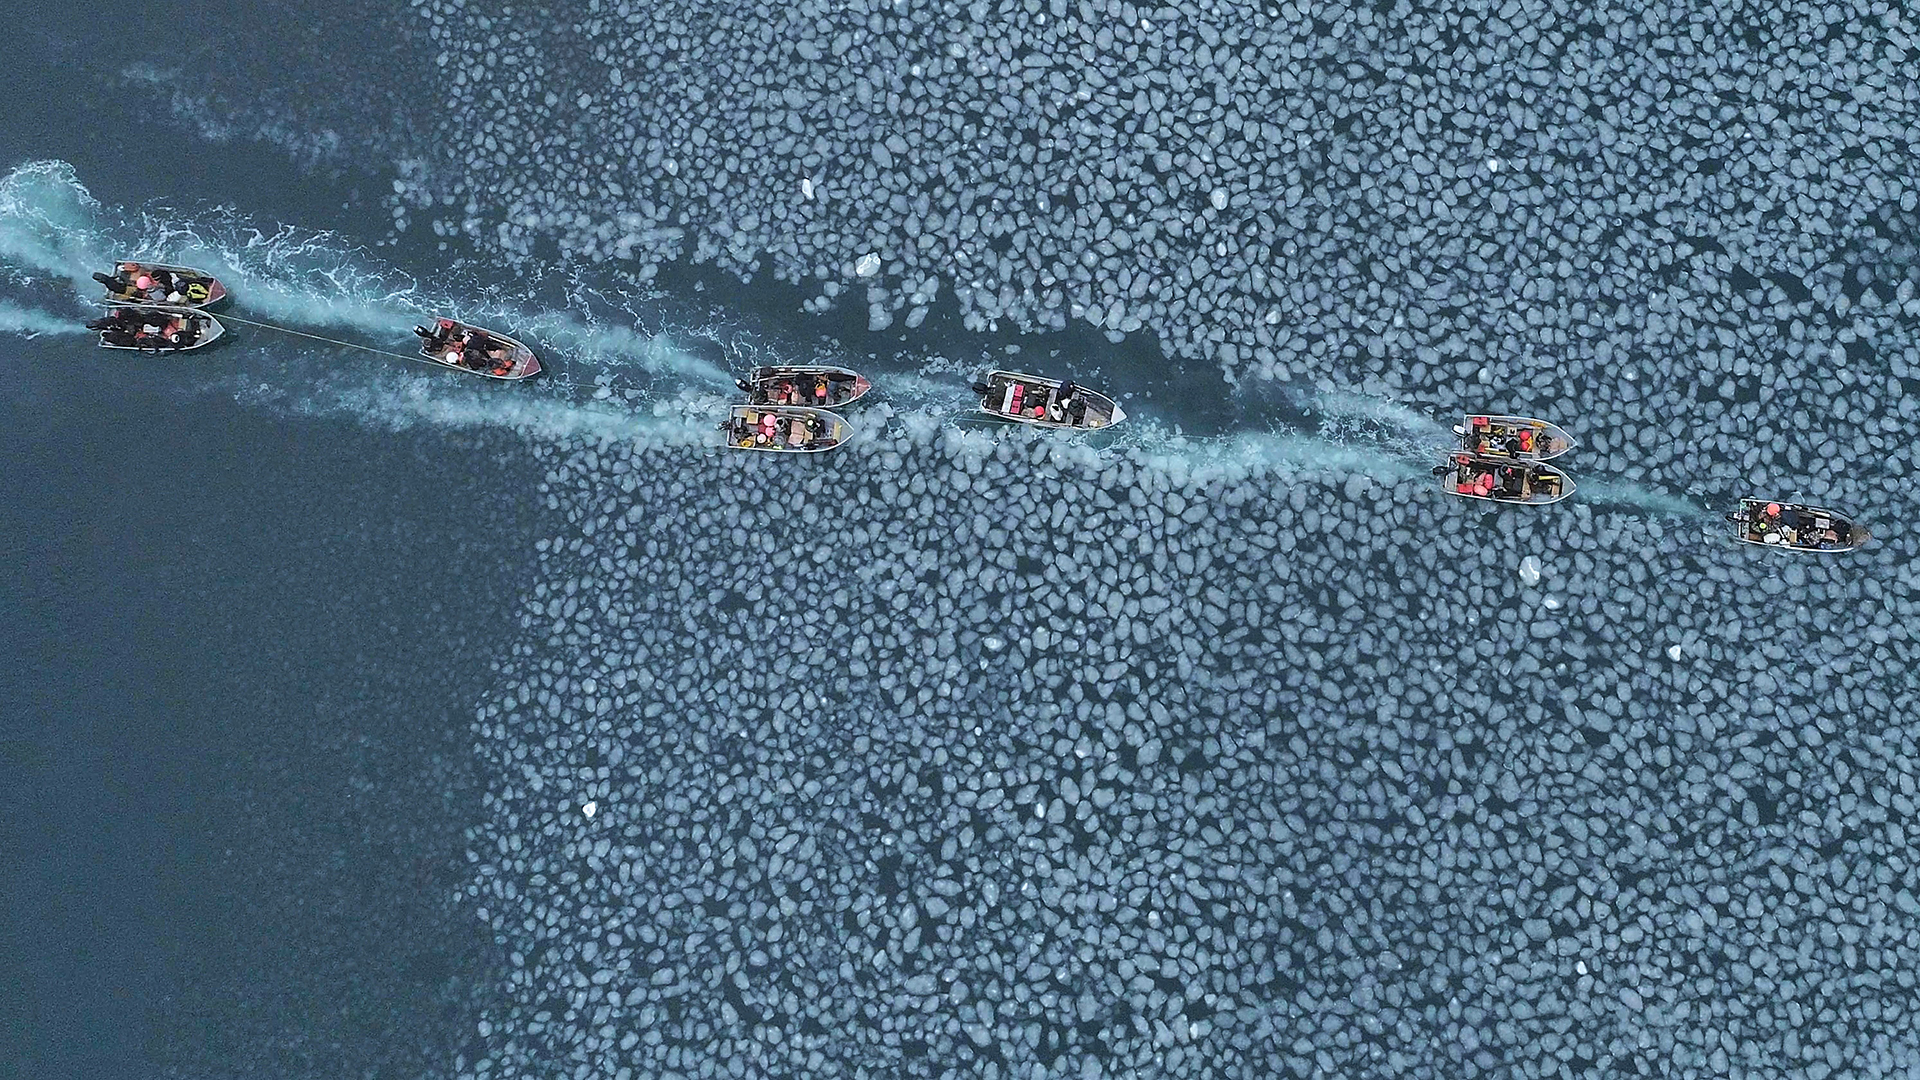 Birds-eye view of boats driving through ice on the Pacific Ocean.